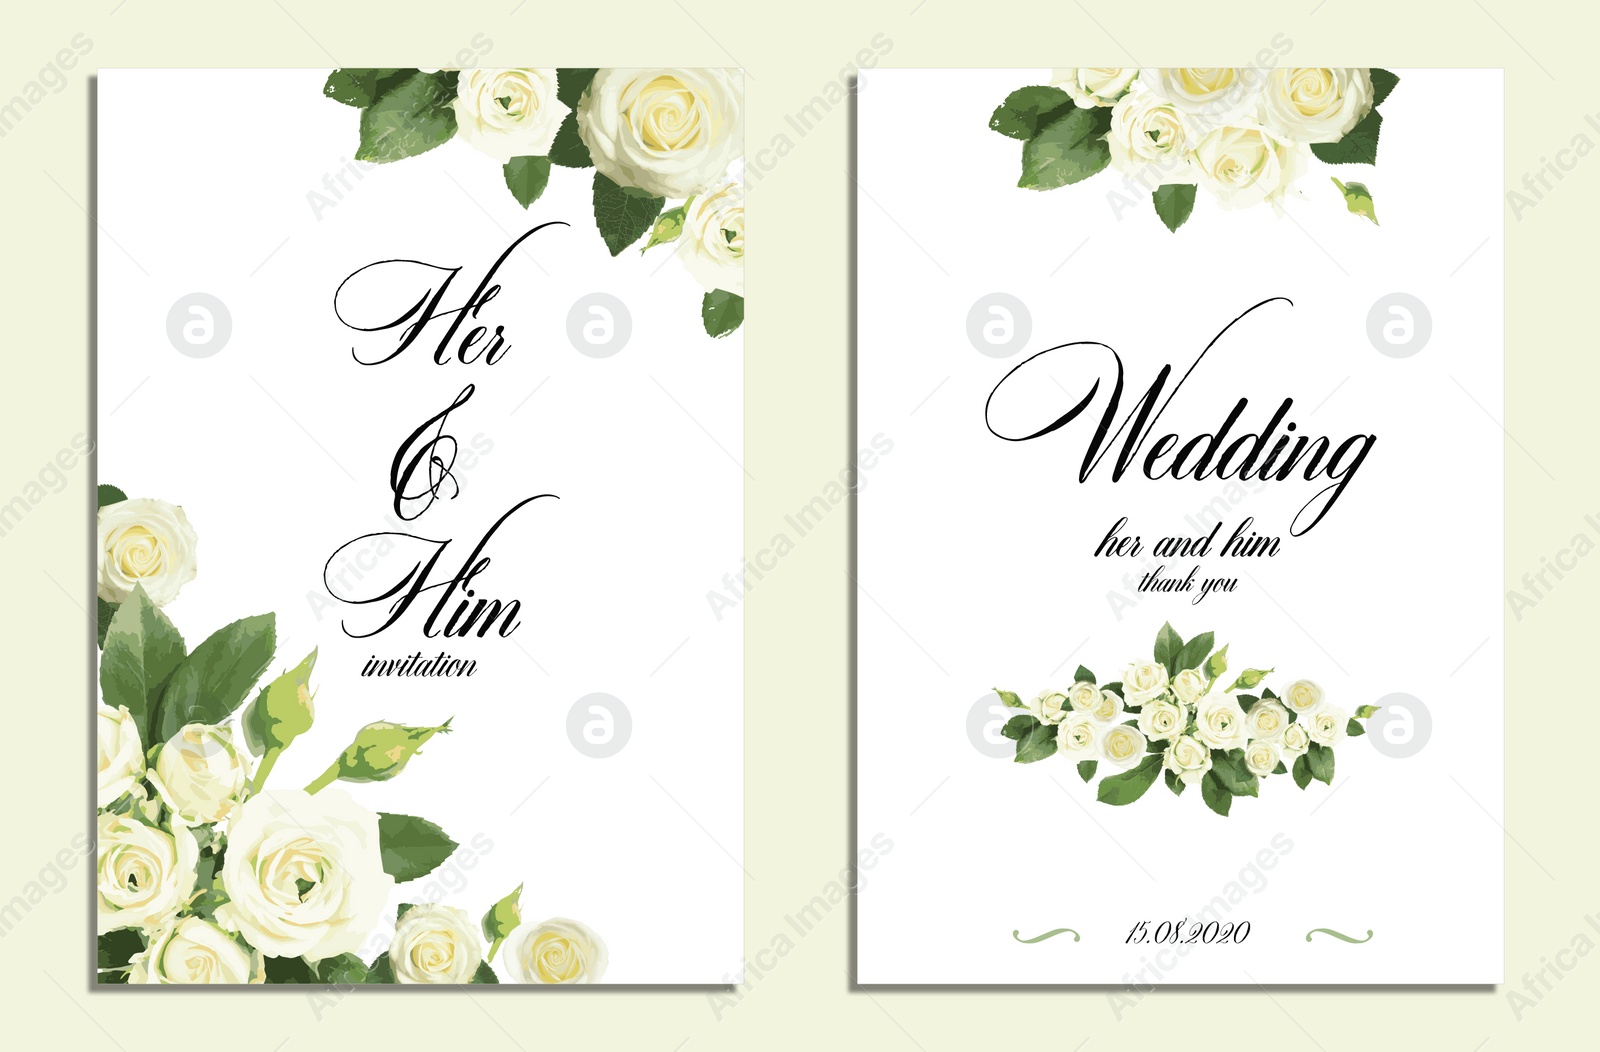 Image of Beautiful wedding invitations with floral design on light background, top view